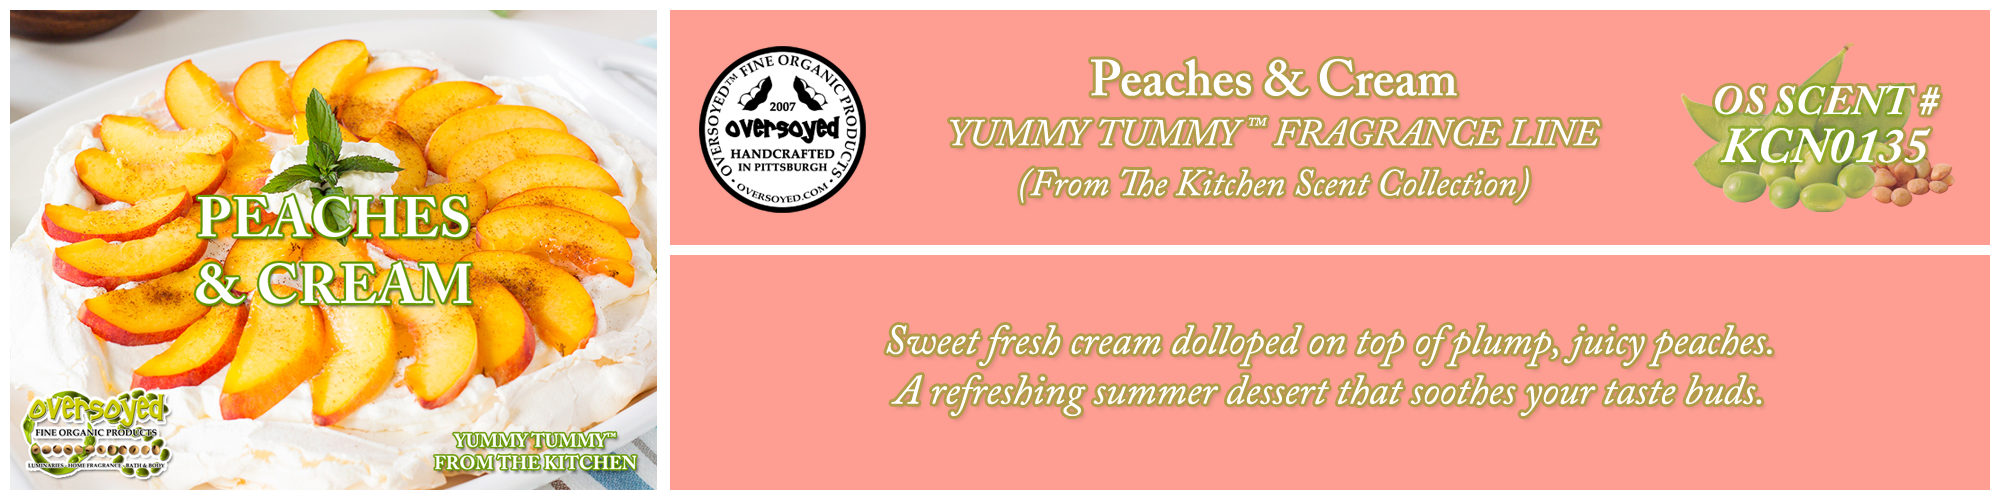 Peaches & Cream Handcrafted Products Collection